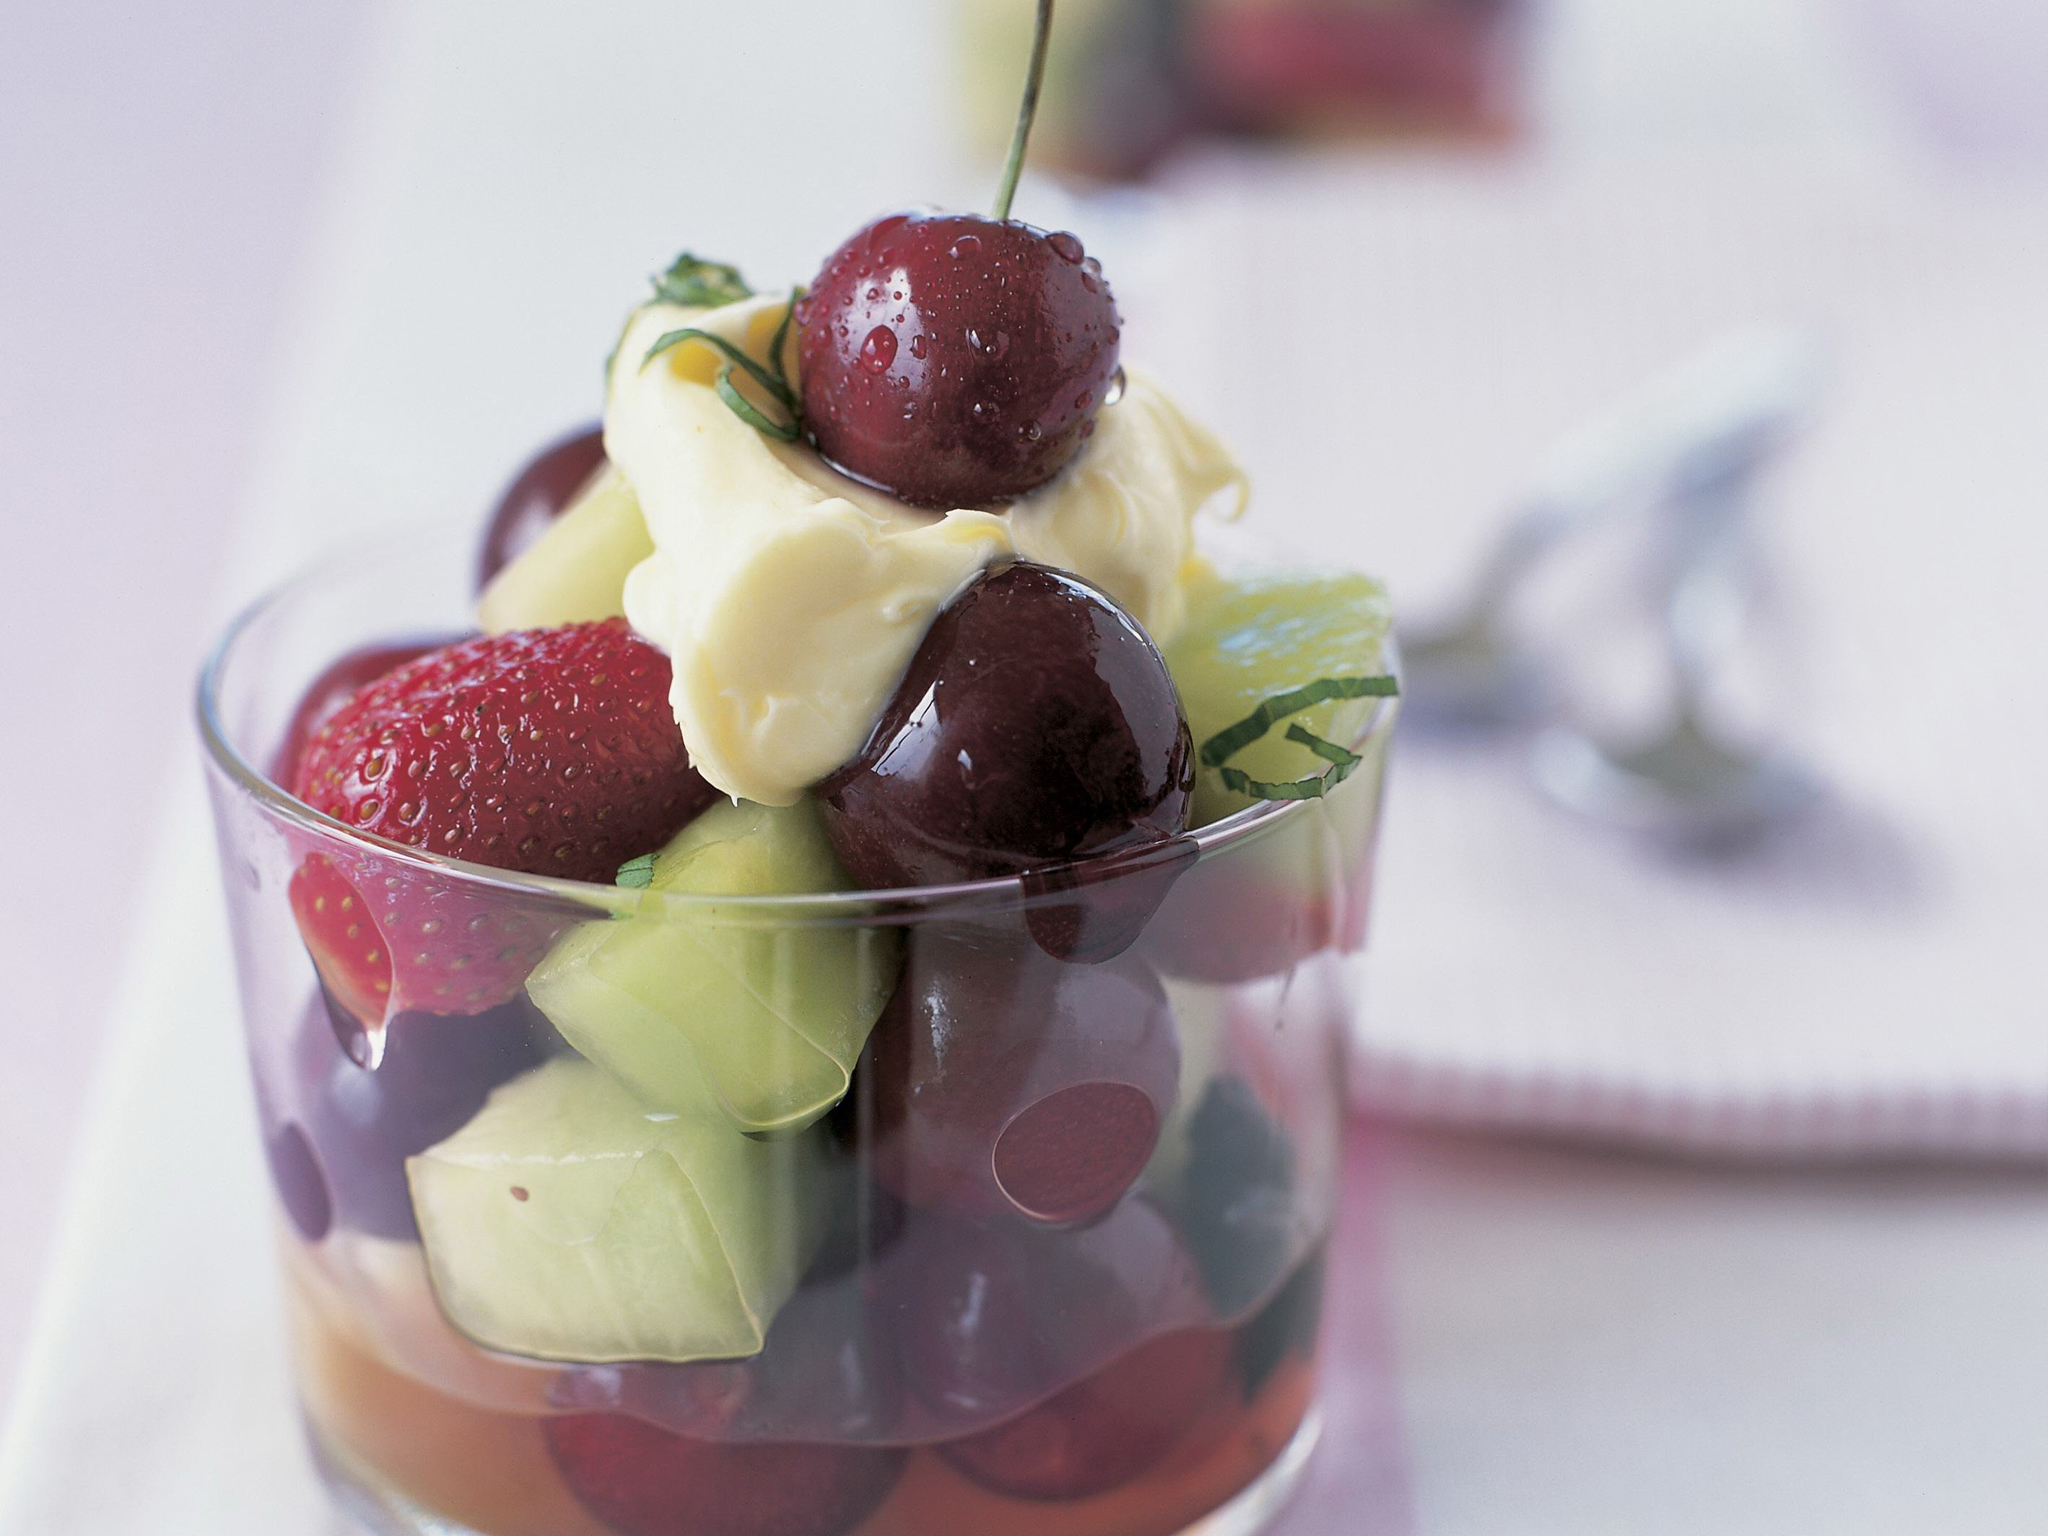 Fruit salad with star-anise syrup